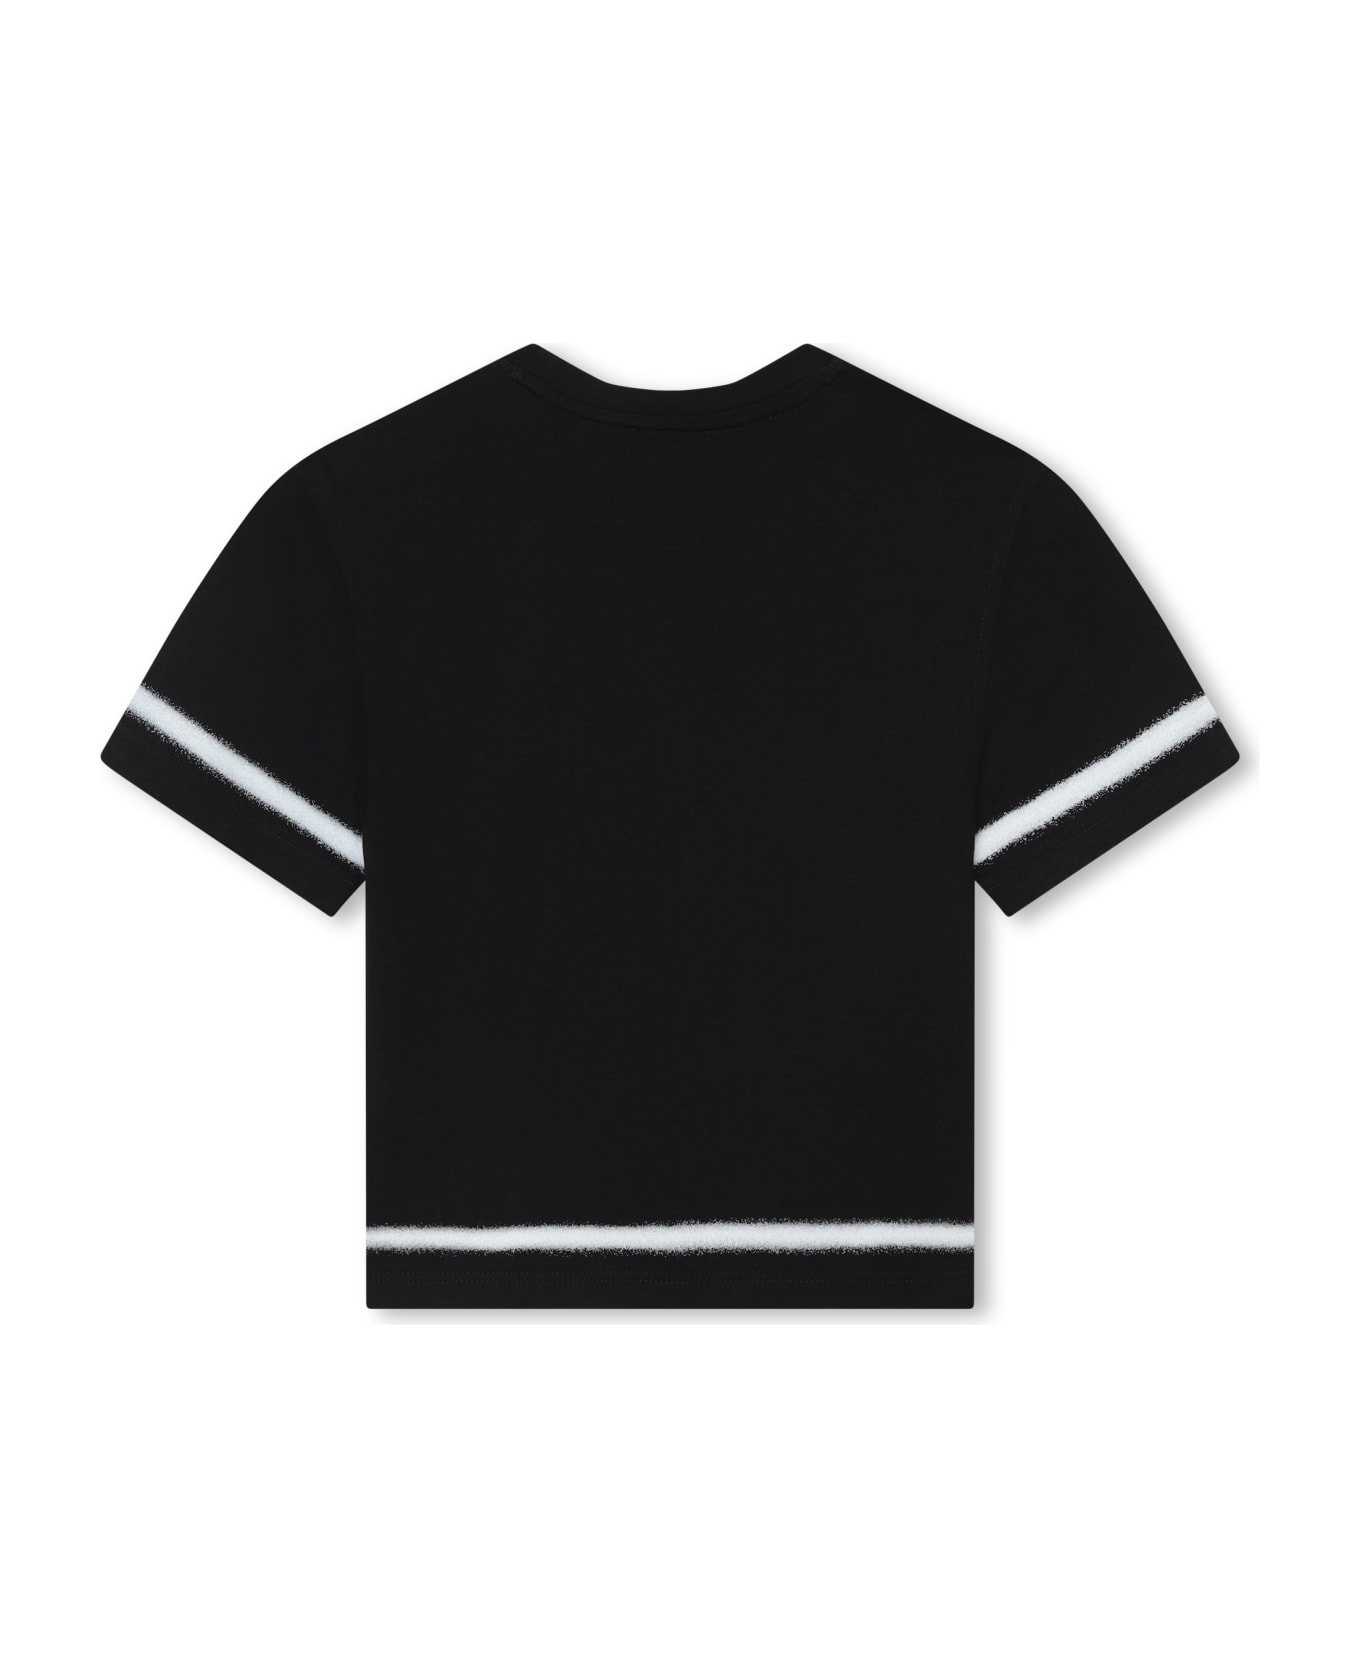 Marc Jacobs T-shirt Con Stampa - Black